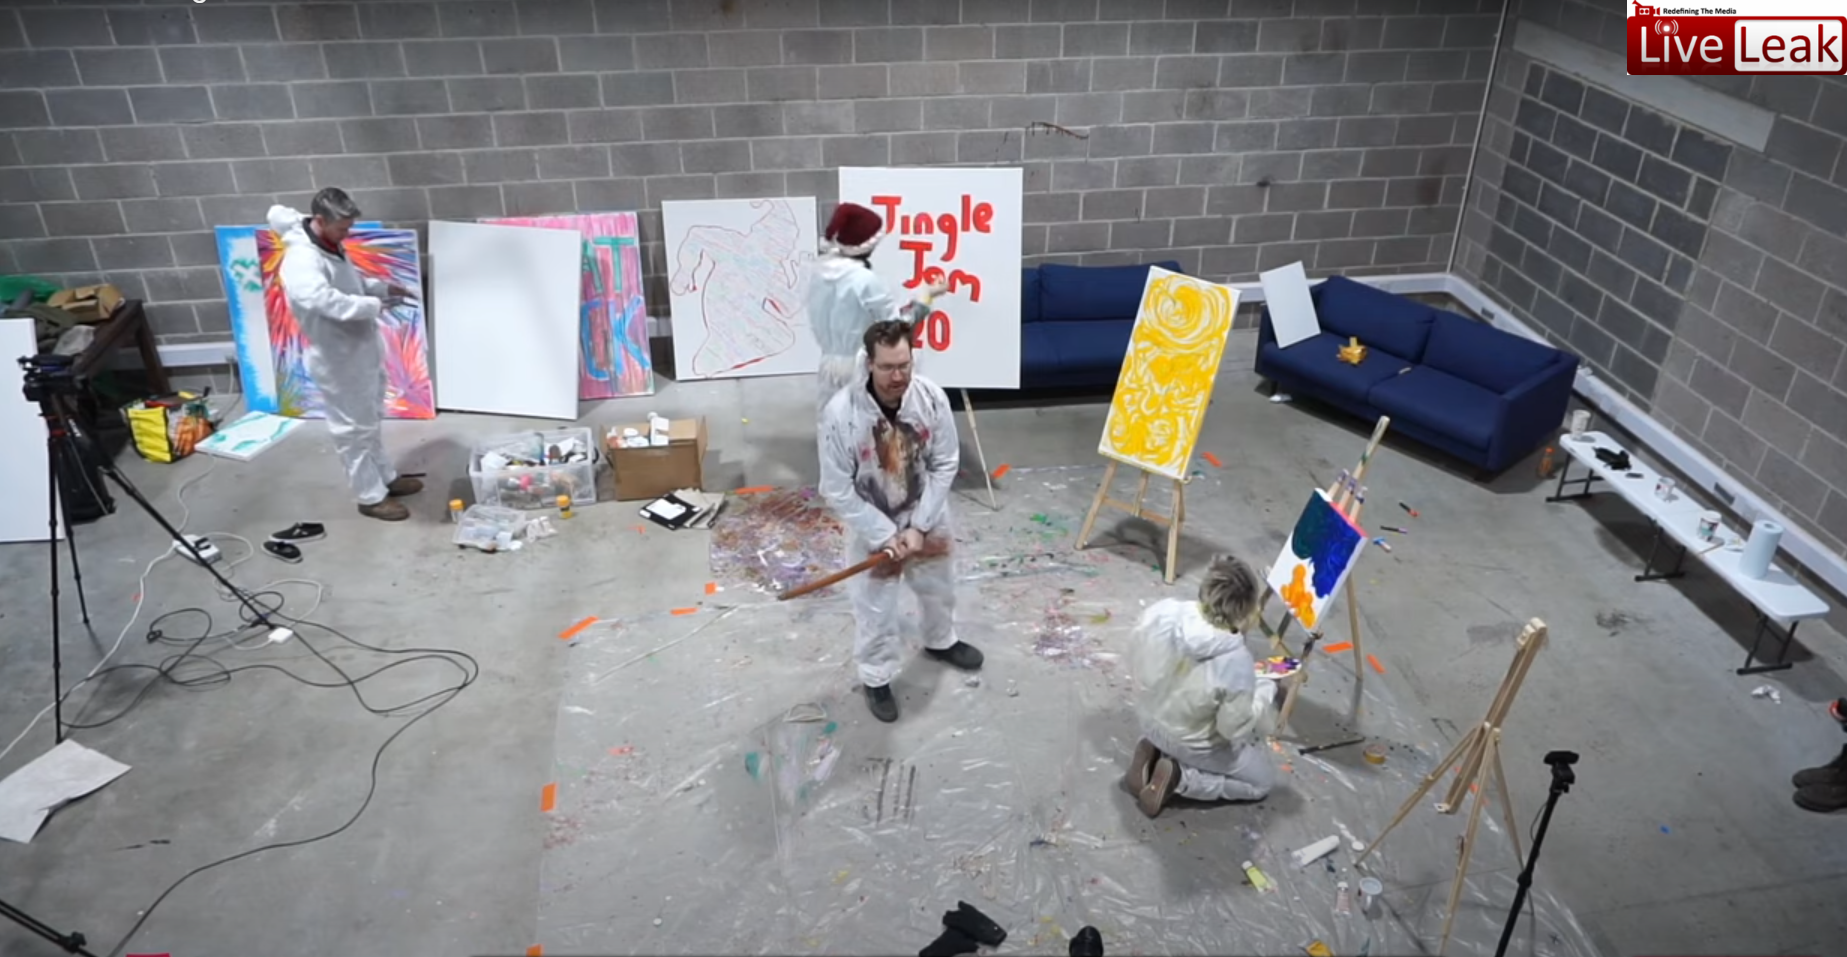 Four person wear white dresses and doing painting in room